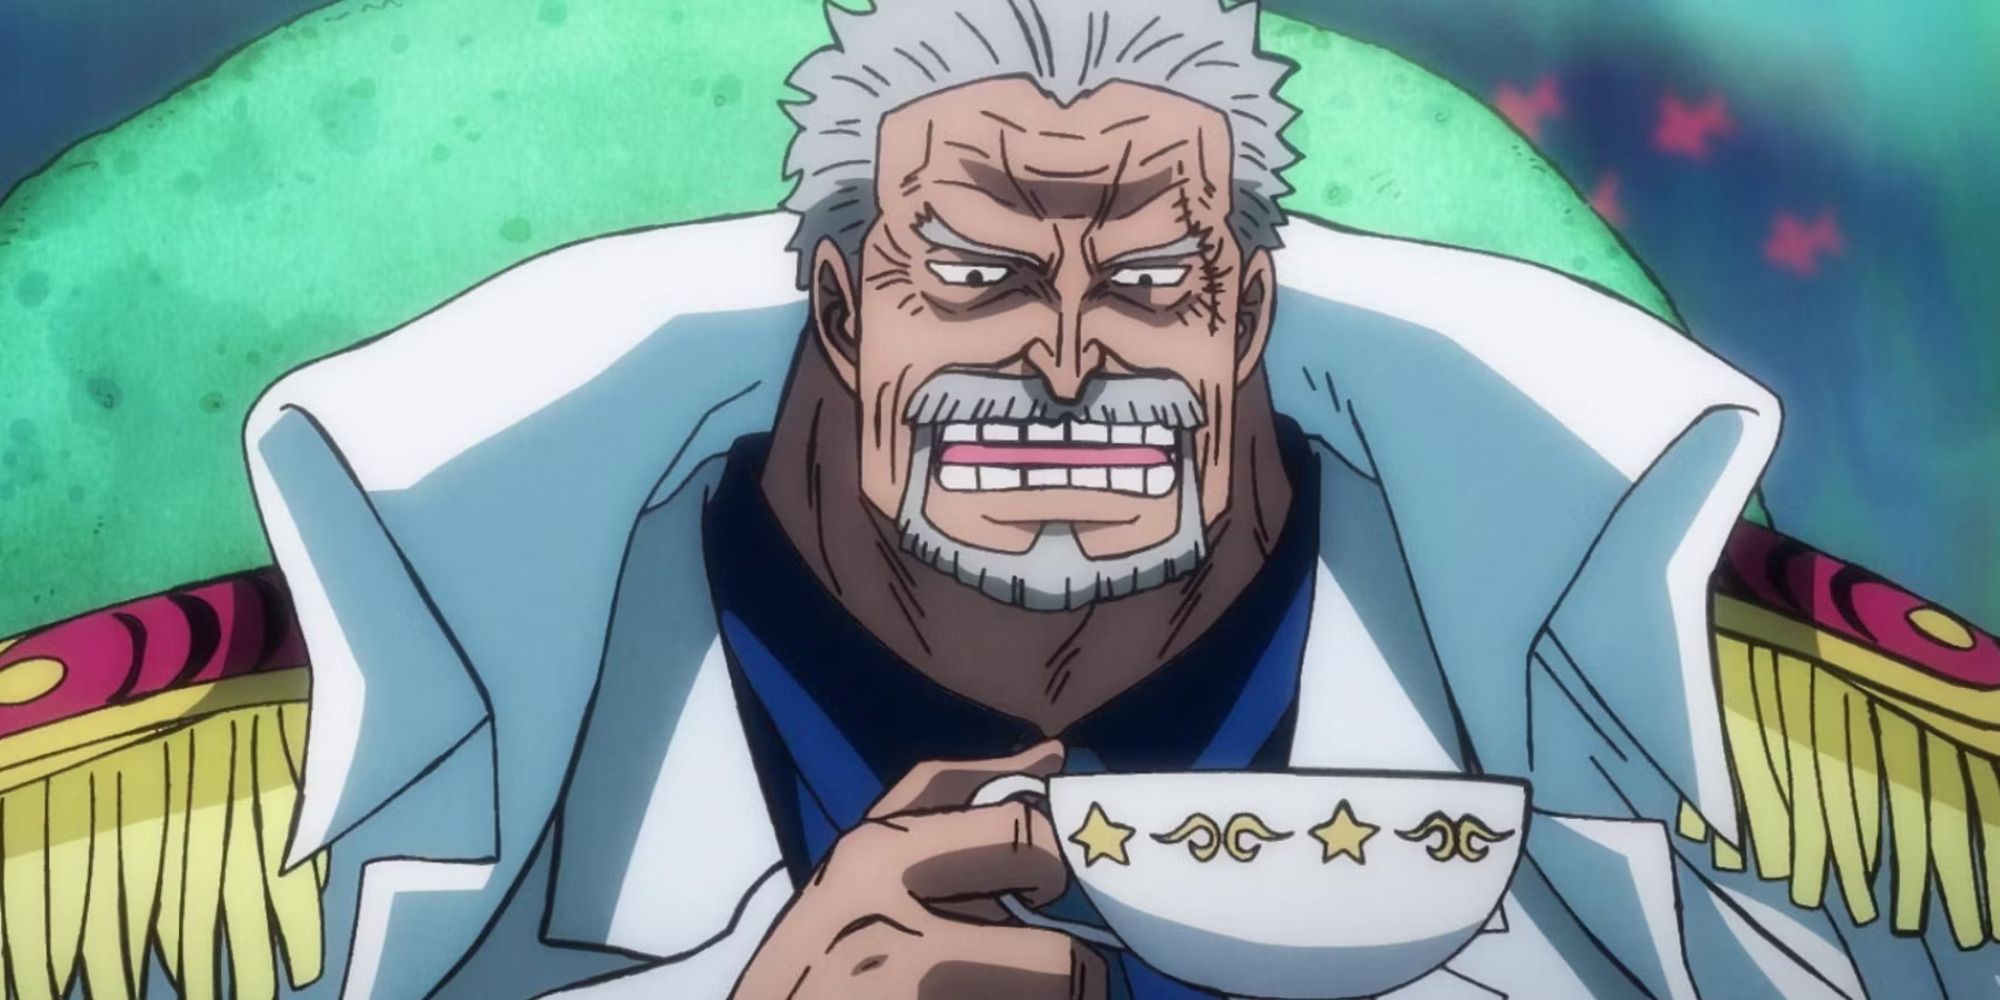 Monkey D Garp holding a cup in his hand (1)